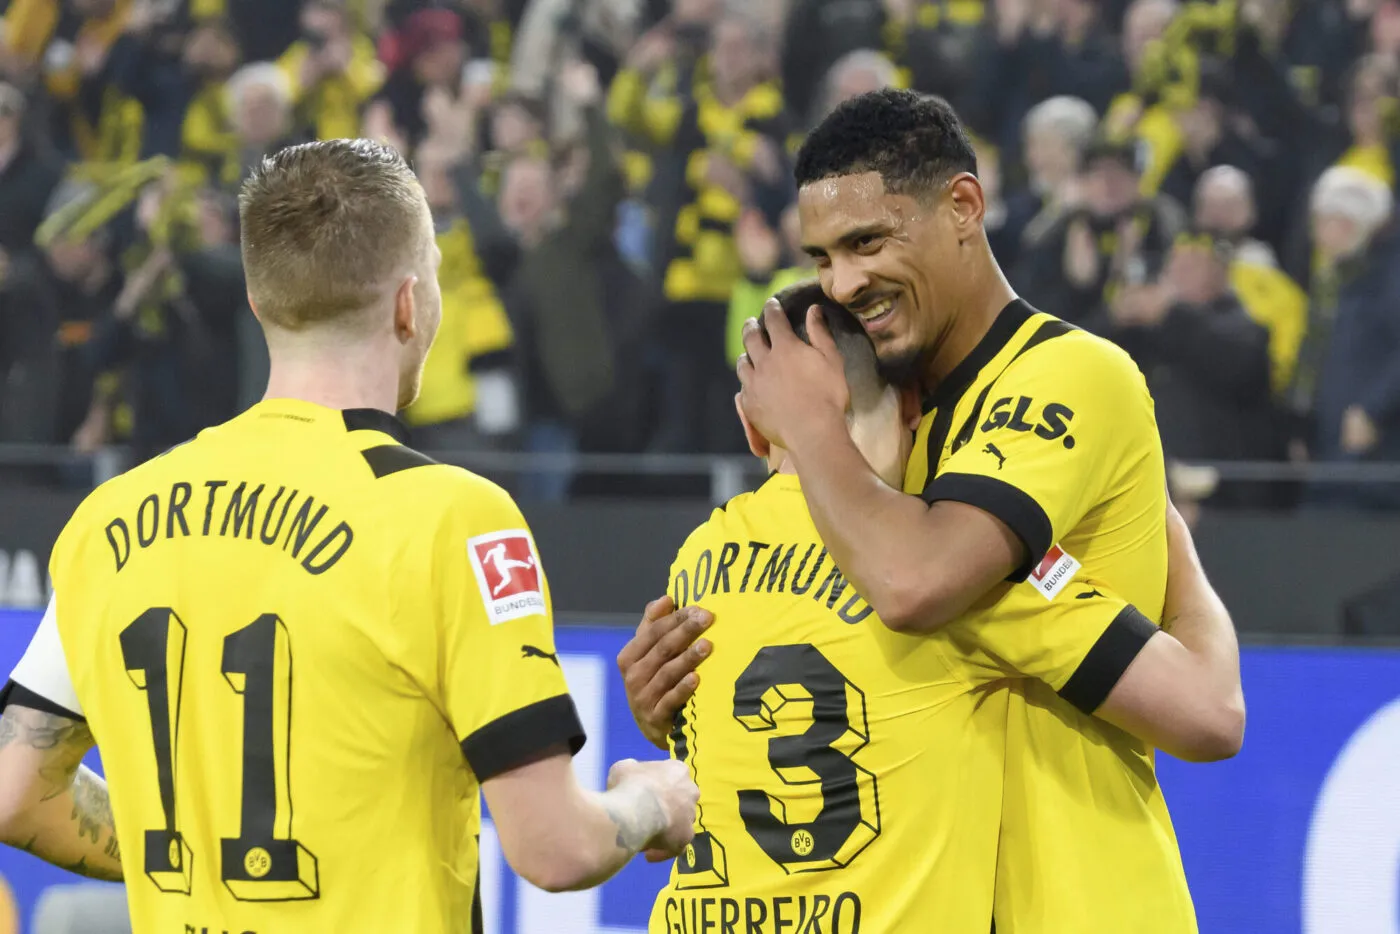 goal scorer Sebastien HALLER (right, DO) cheers with Raphael GUERREIRO (middle, DO) and Marco REUS (DO) about his goal to make it 2-0 for Borussia Dortmund Soccer 1st Bundesliga, 25th matchday, Borussia Dortmund (DO) - 1st FC Cologne (K) 6: 1, on March 18th, 2023 in Dortmund/ Germany. - Photo by Icon sport